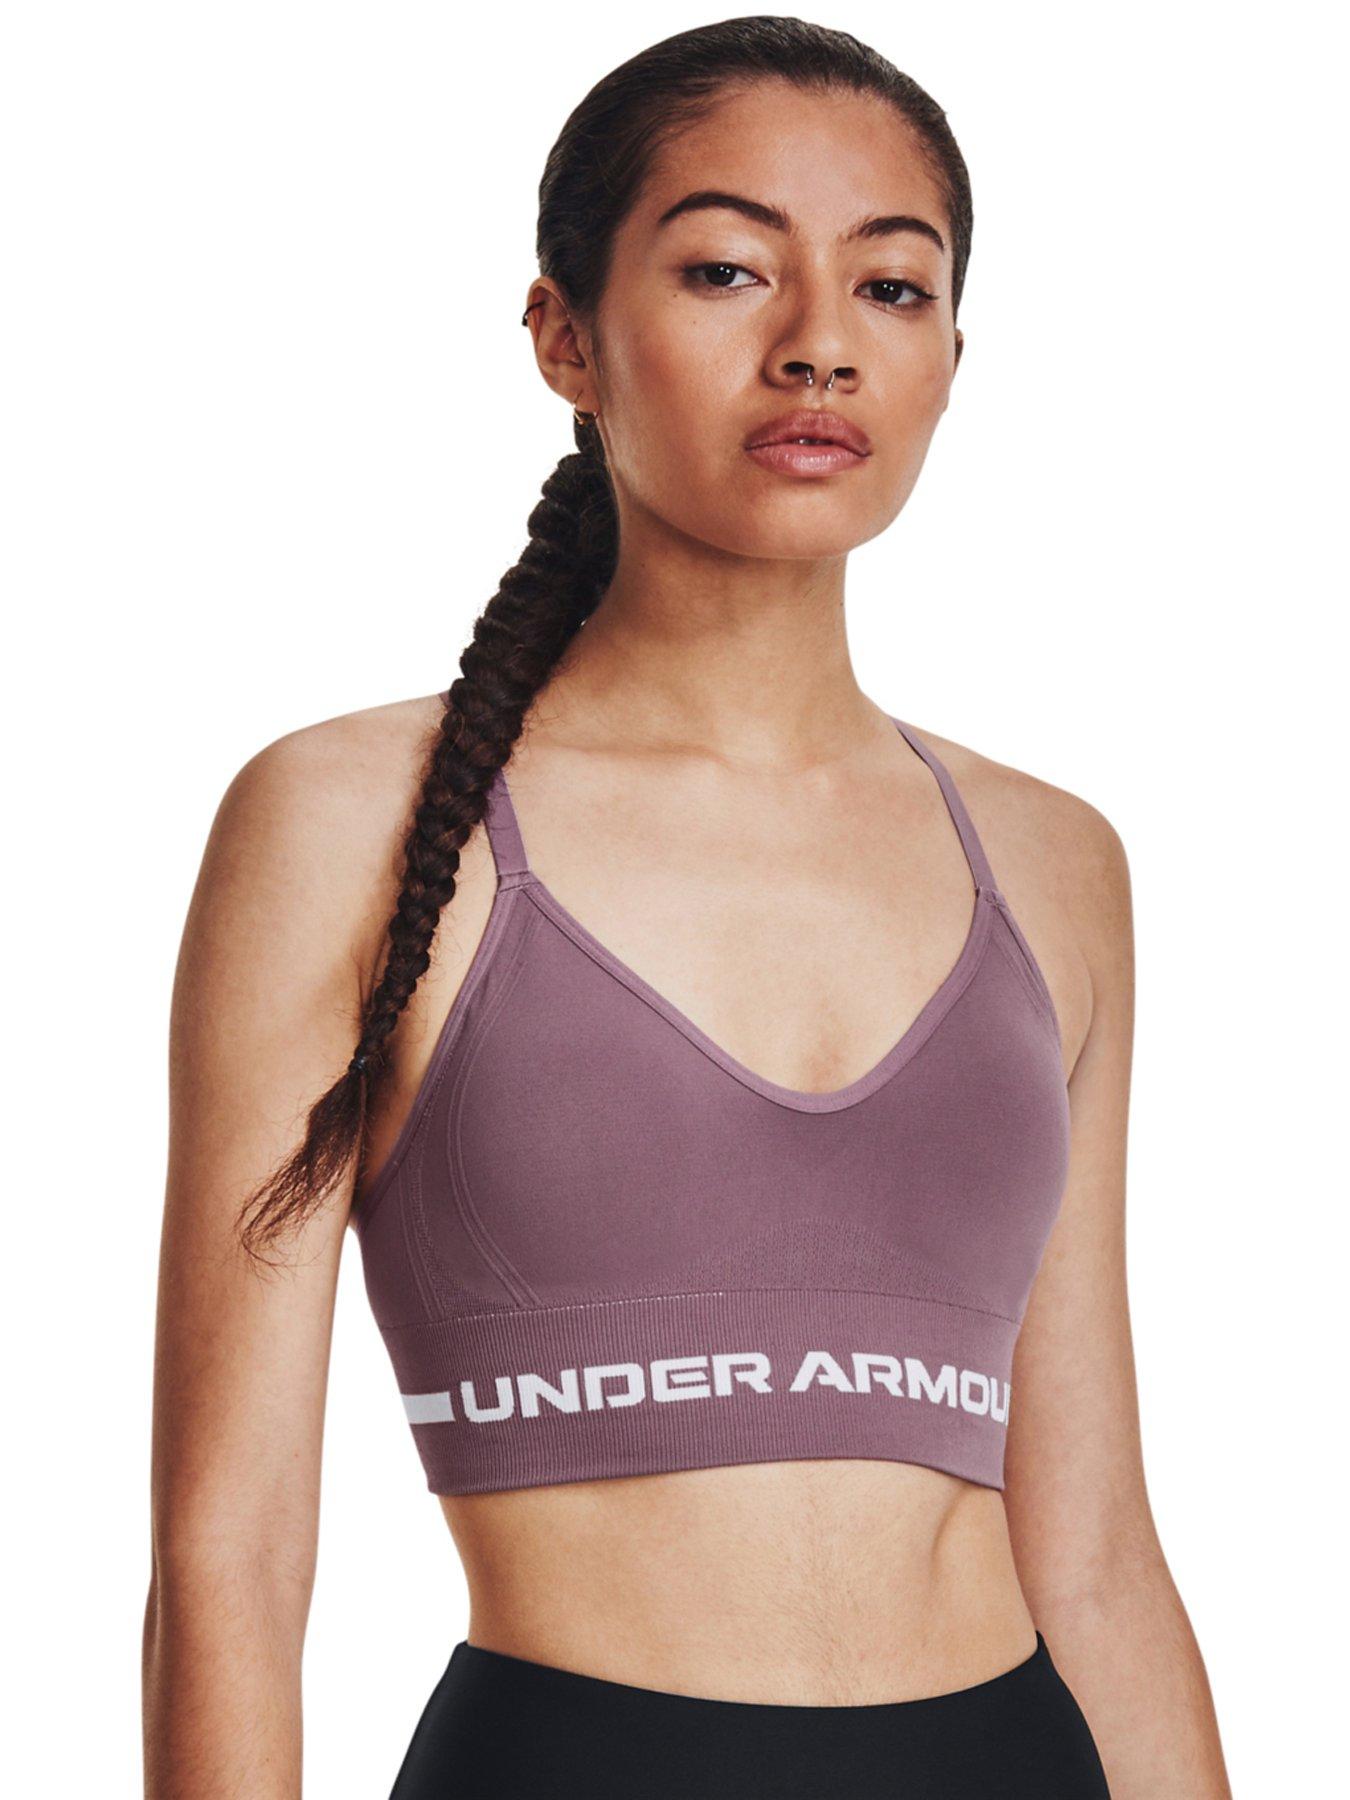 UNDER ARMOUR Womens Support Non-Padded Sport Bra SIZE M Racerback